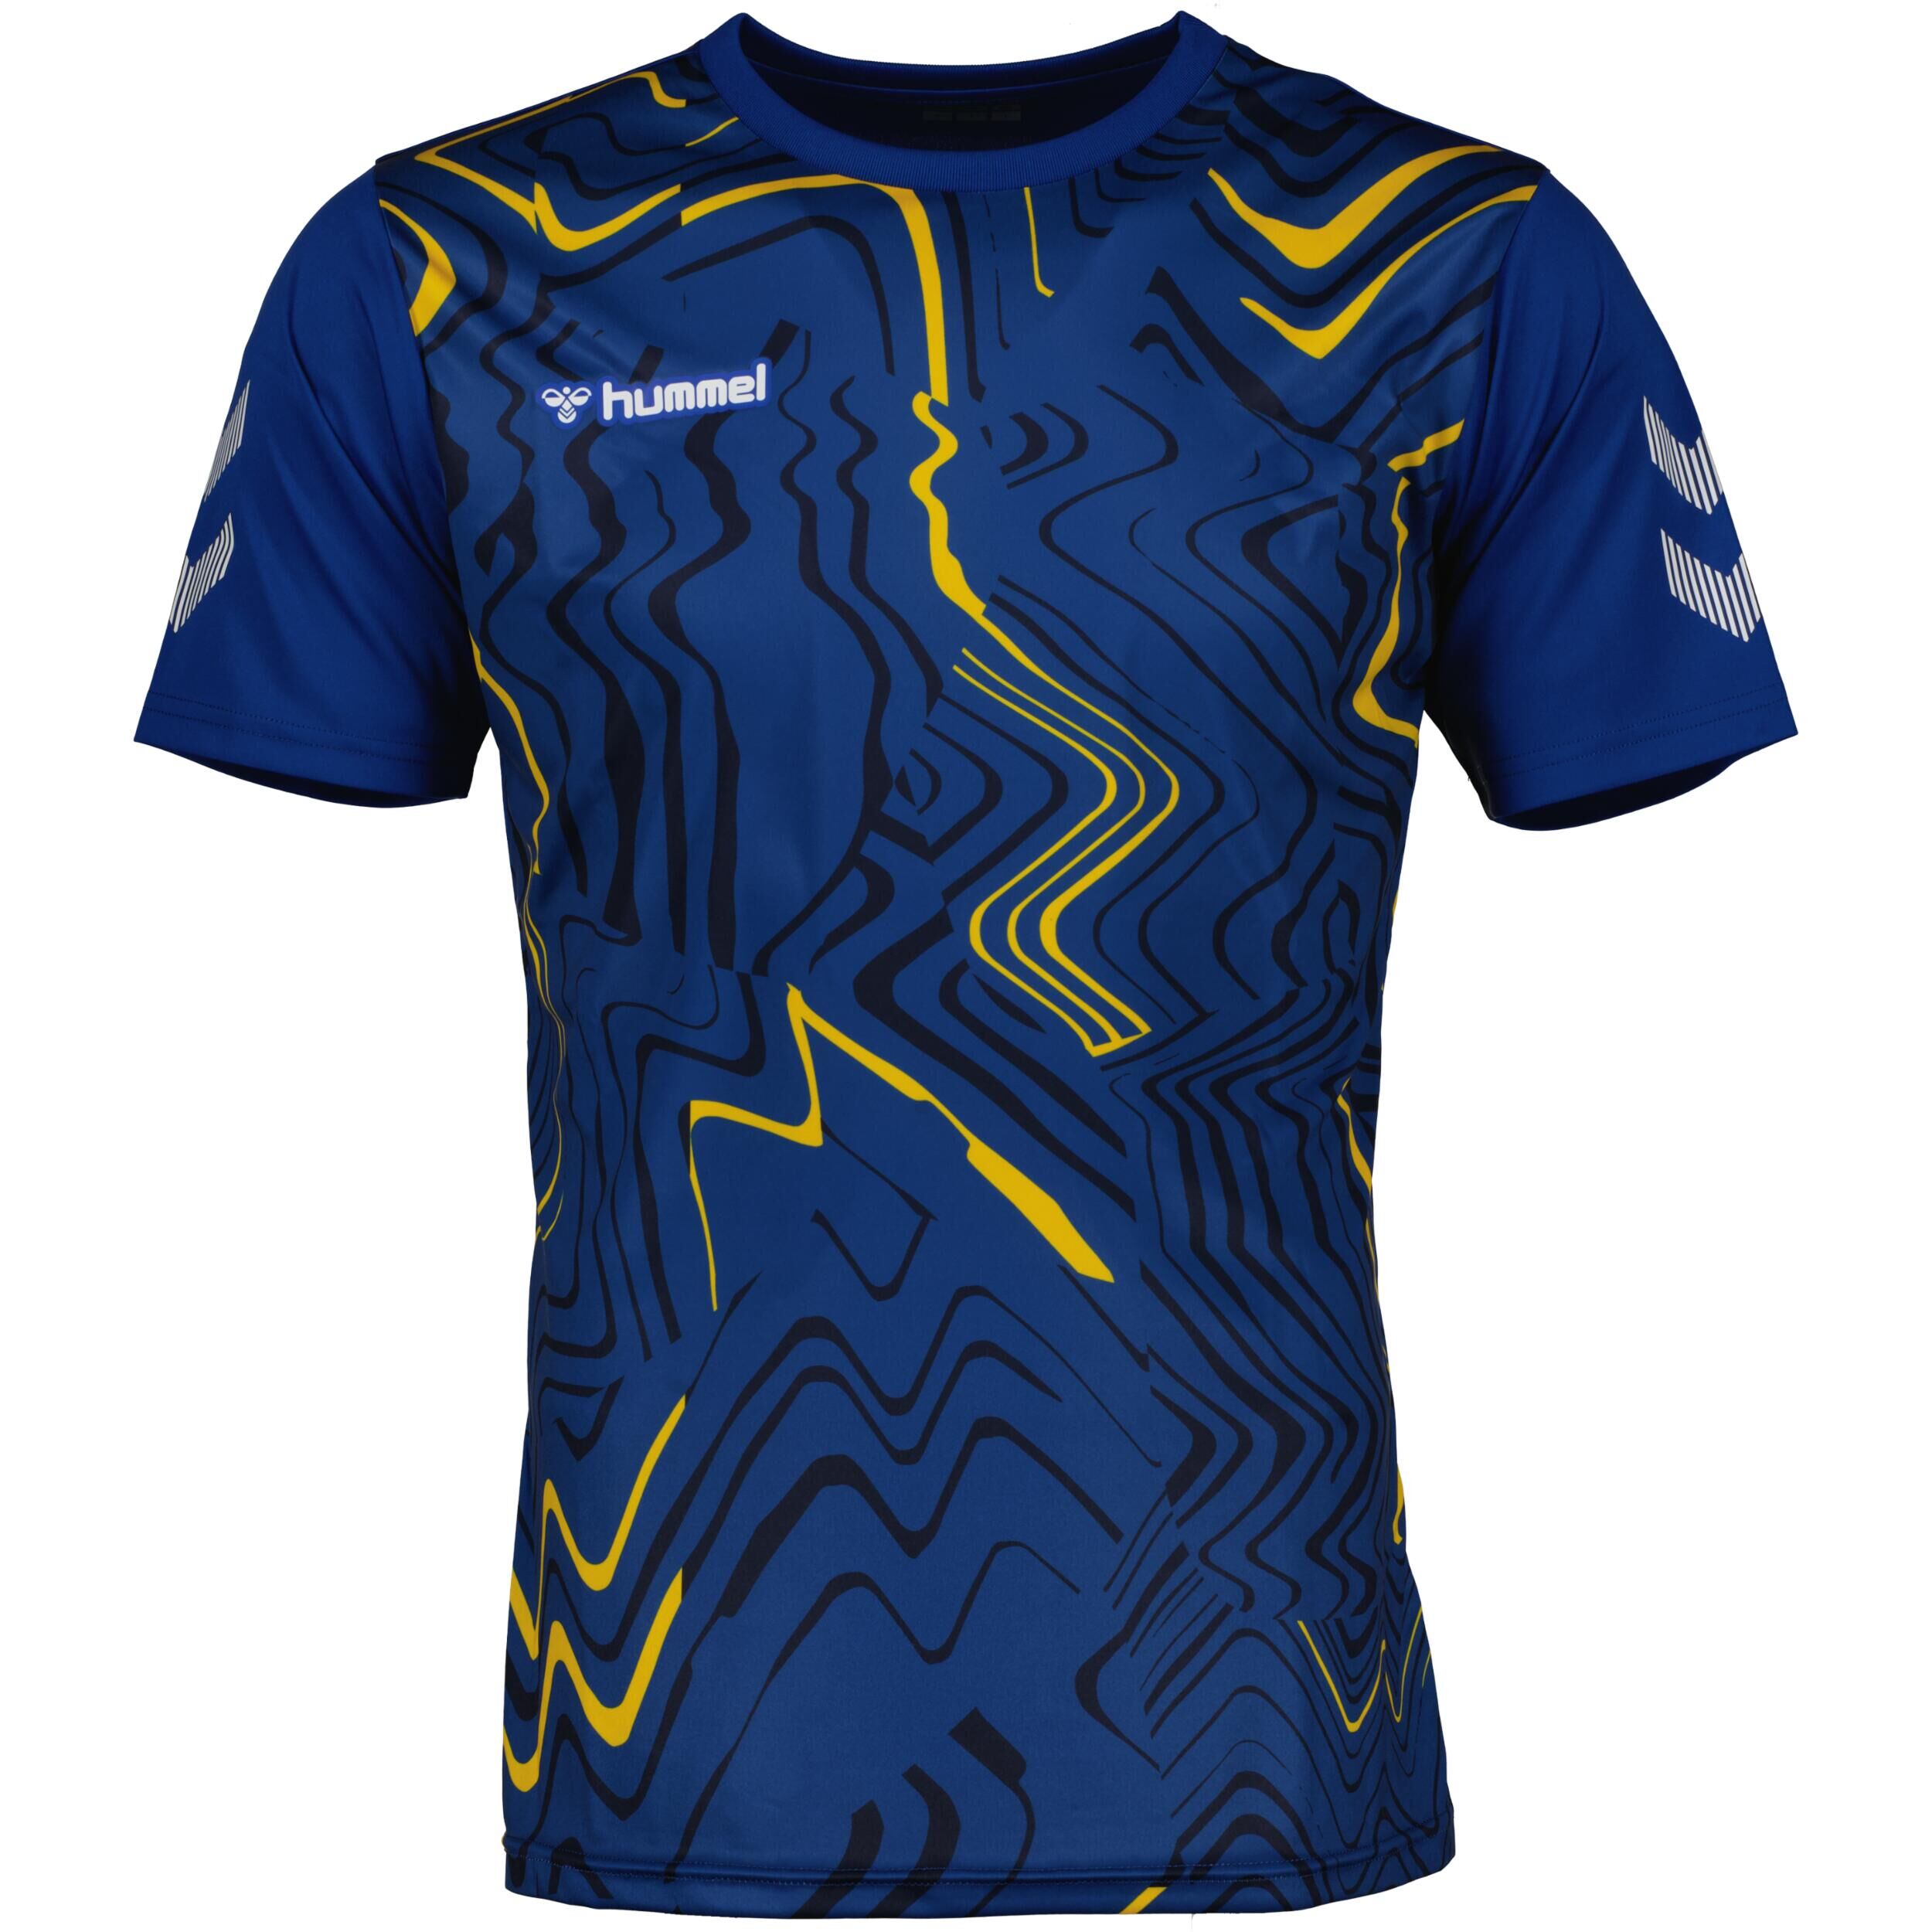 HUMMEL Hydro jersey for men, great for football, in true blue/marine/yellow